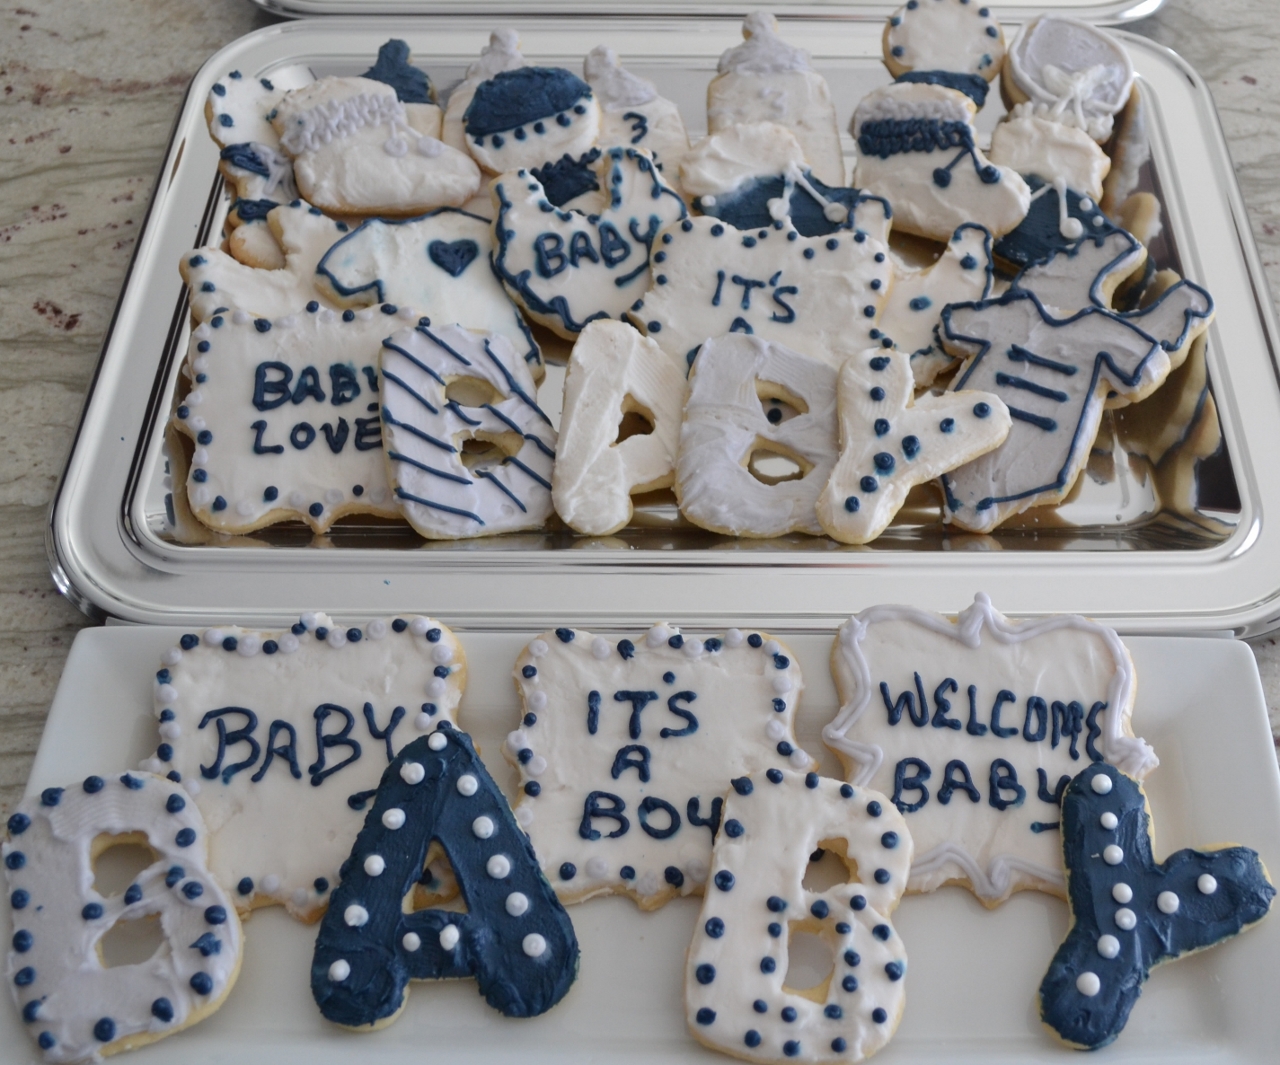 baby-showerS-MODERN-DAY-TRENDS